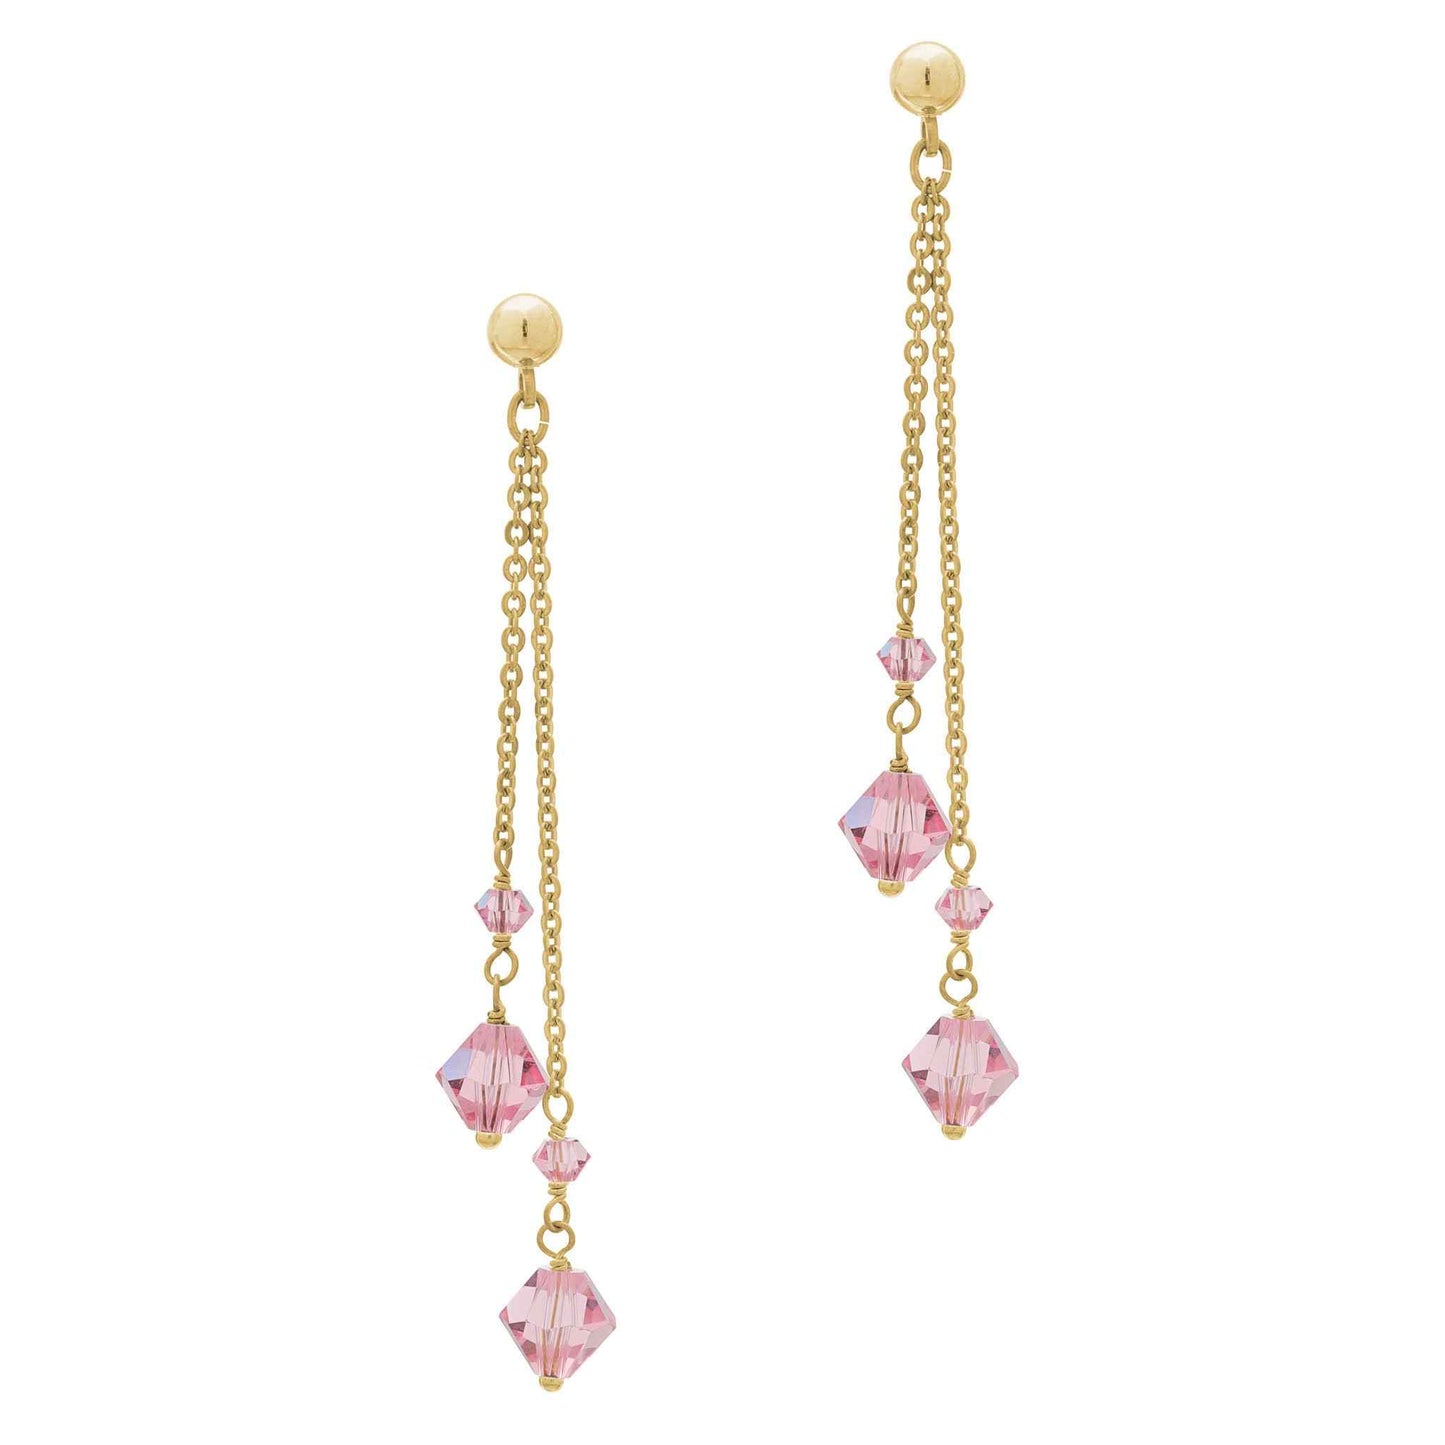 A white crystal drop earrings displayed on a neutral white background.